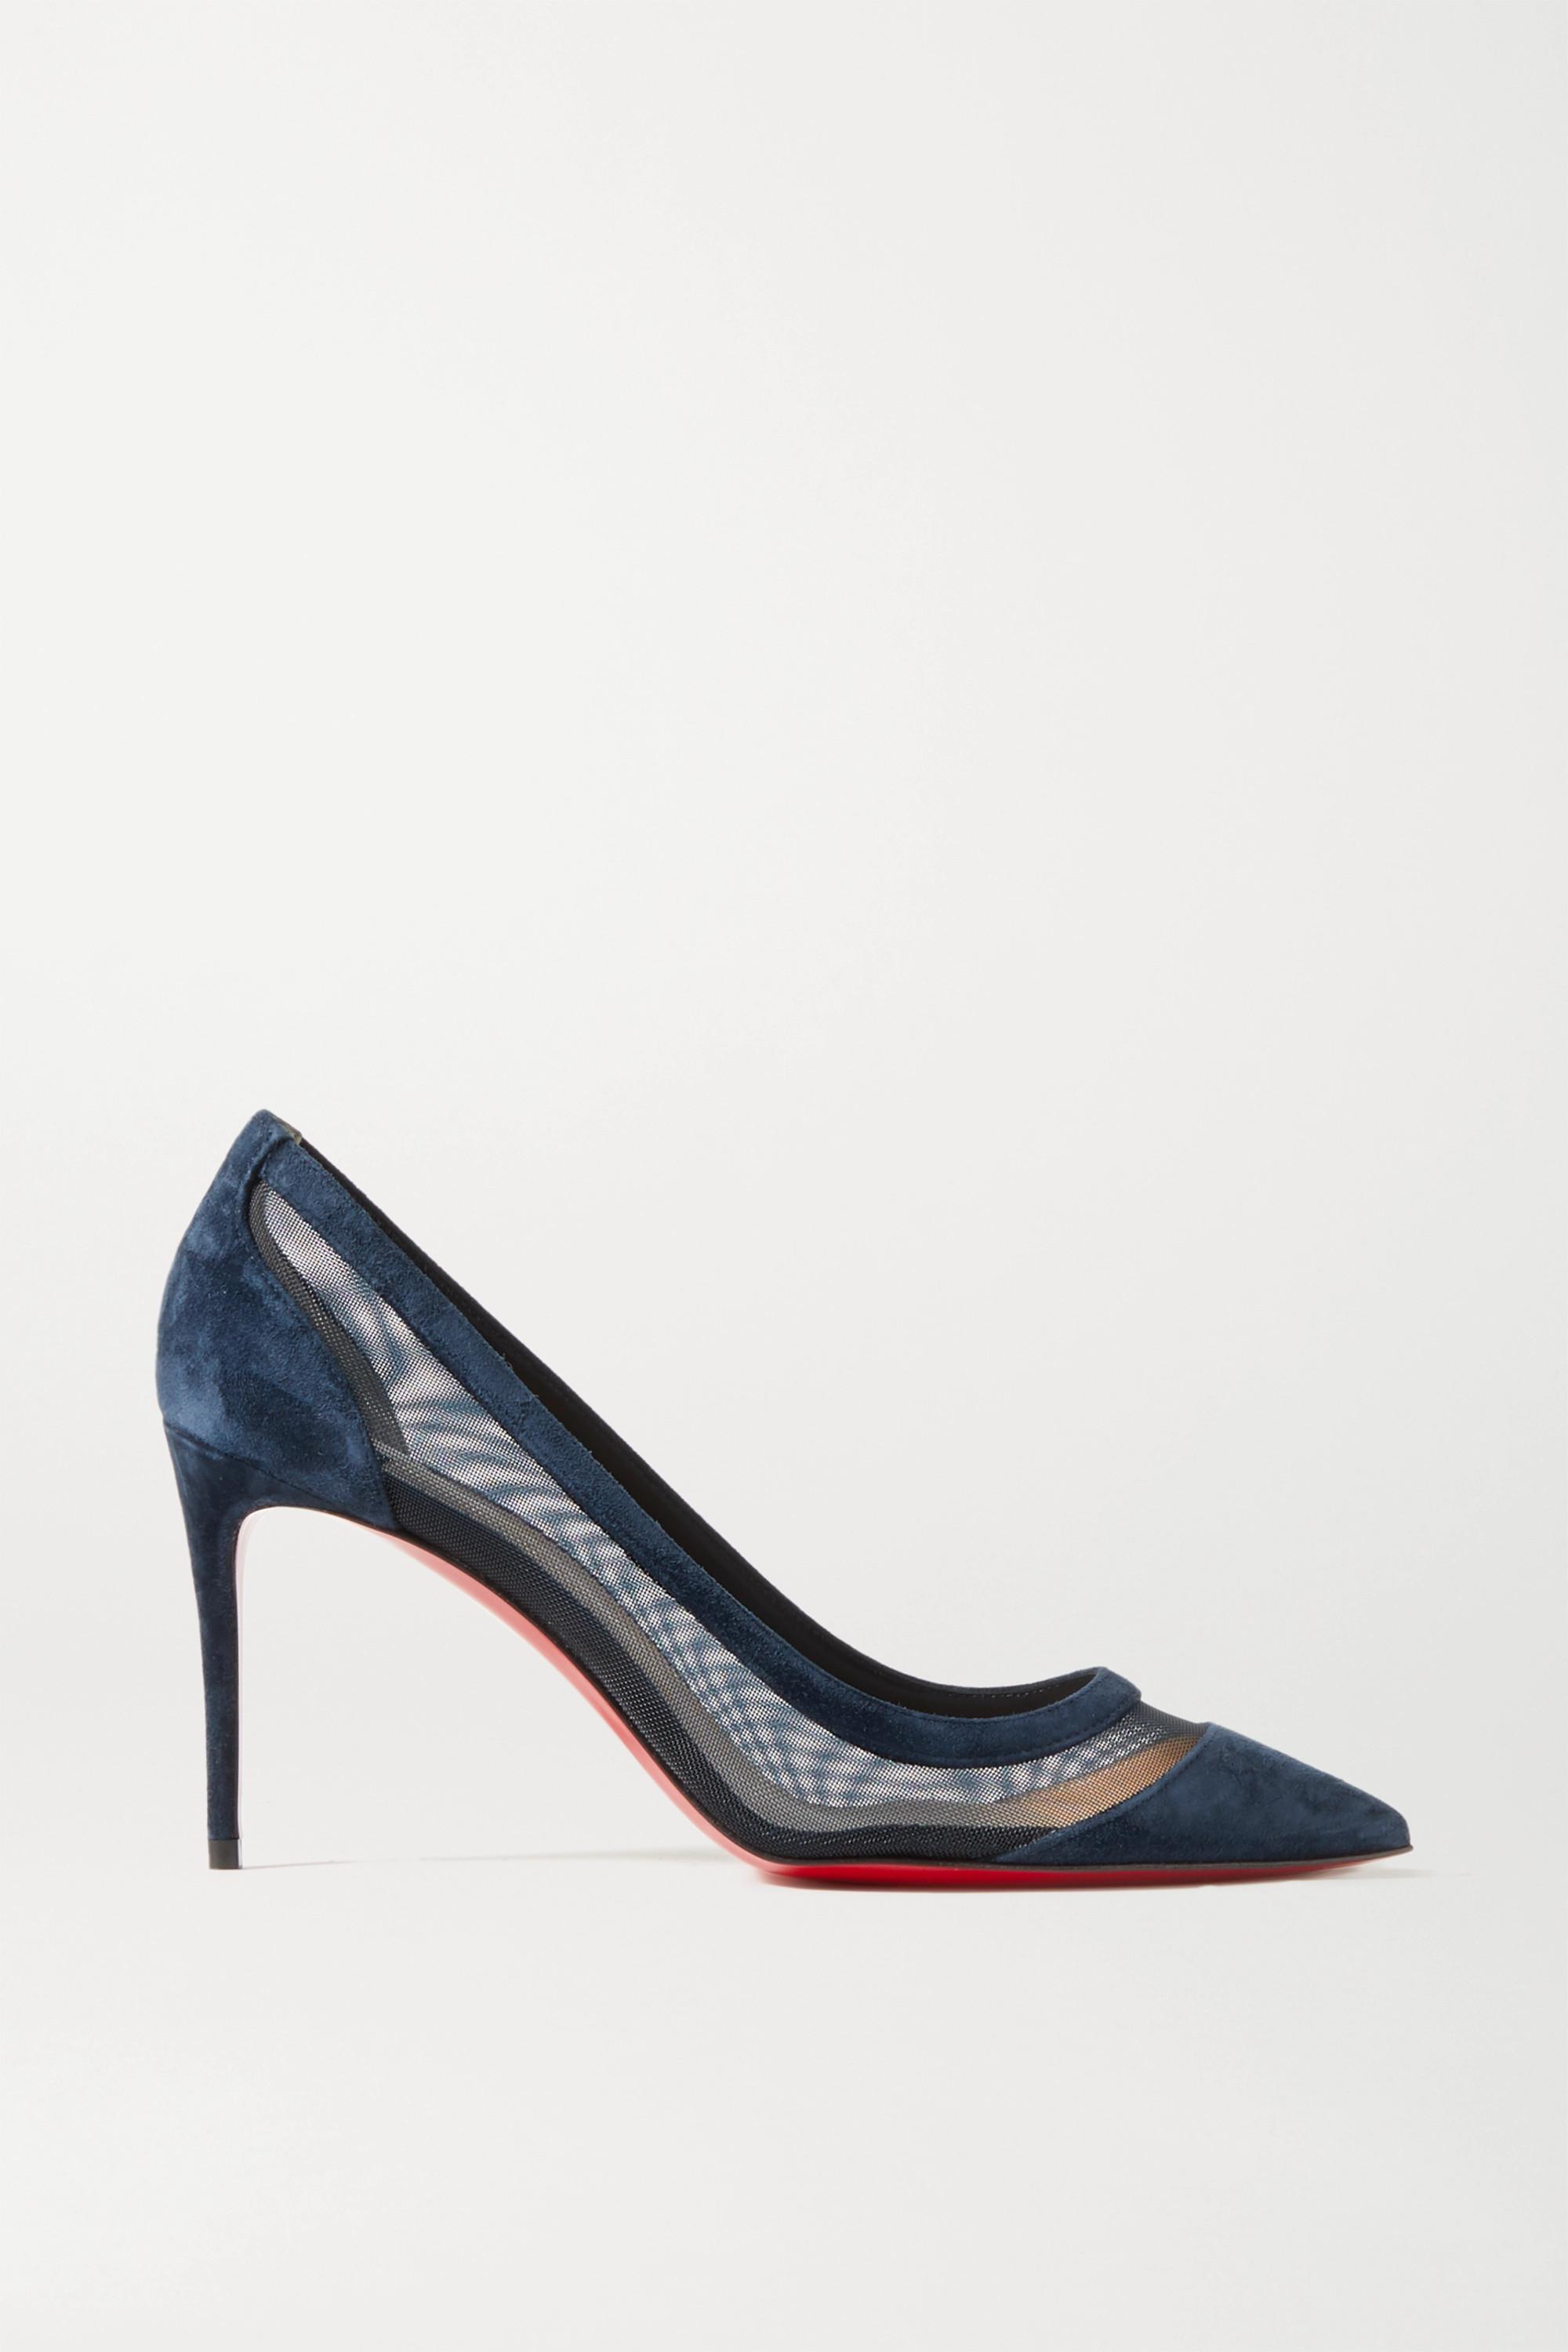 Christian Louboutin Galativi 85 Suede And Mesh Pumps in Blue | Lyst